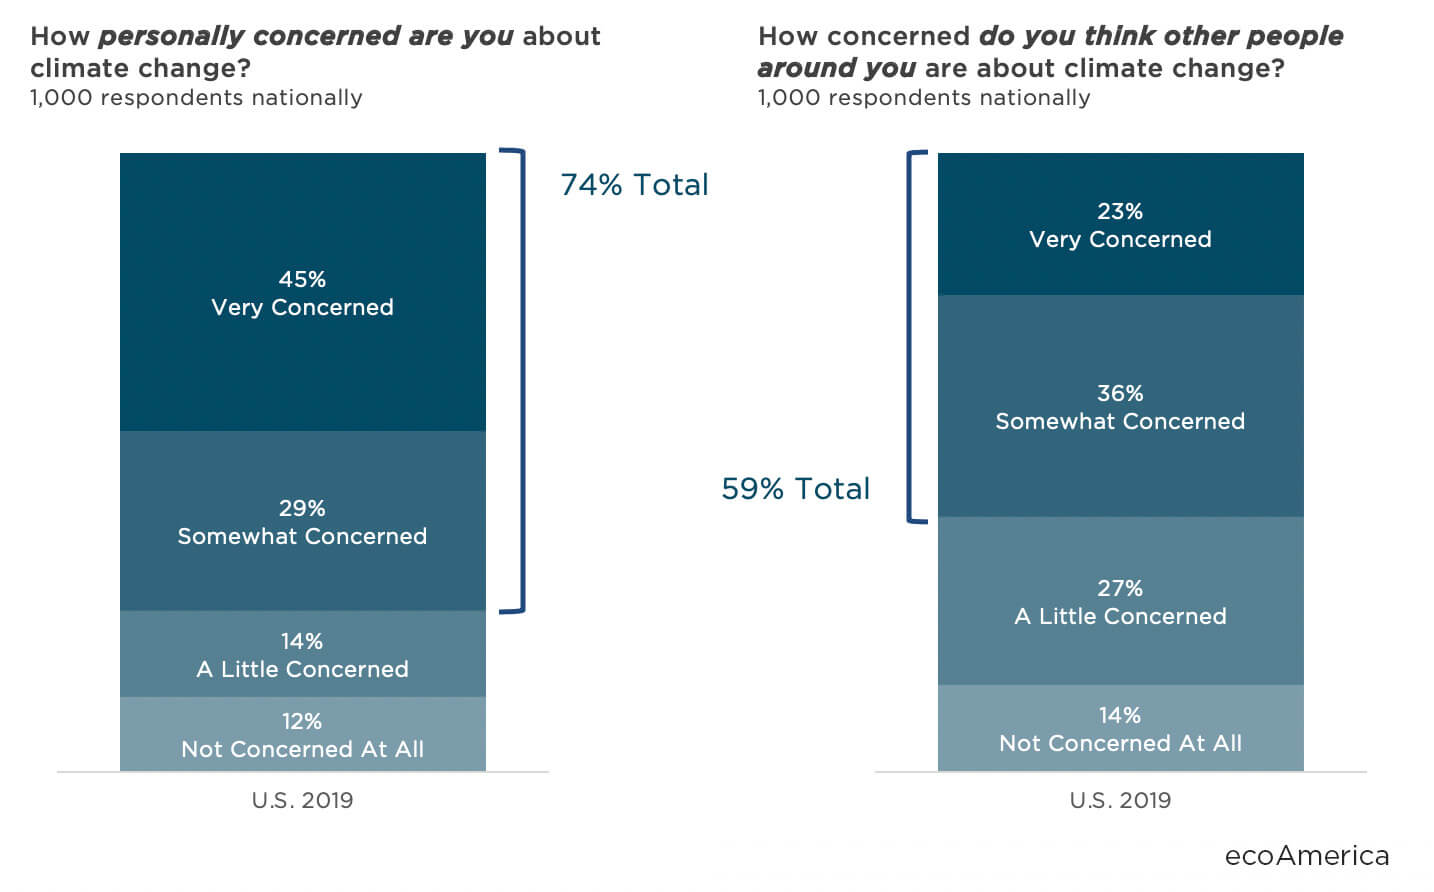 74% of Americans say they are concerned; 59% say others around them are concerned